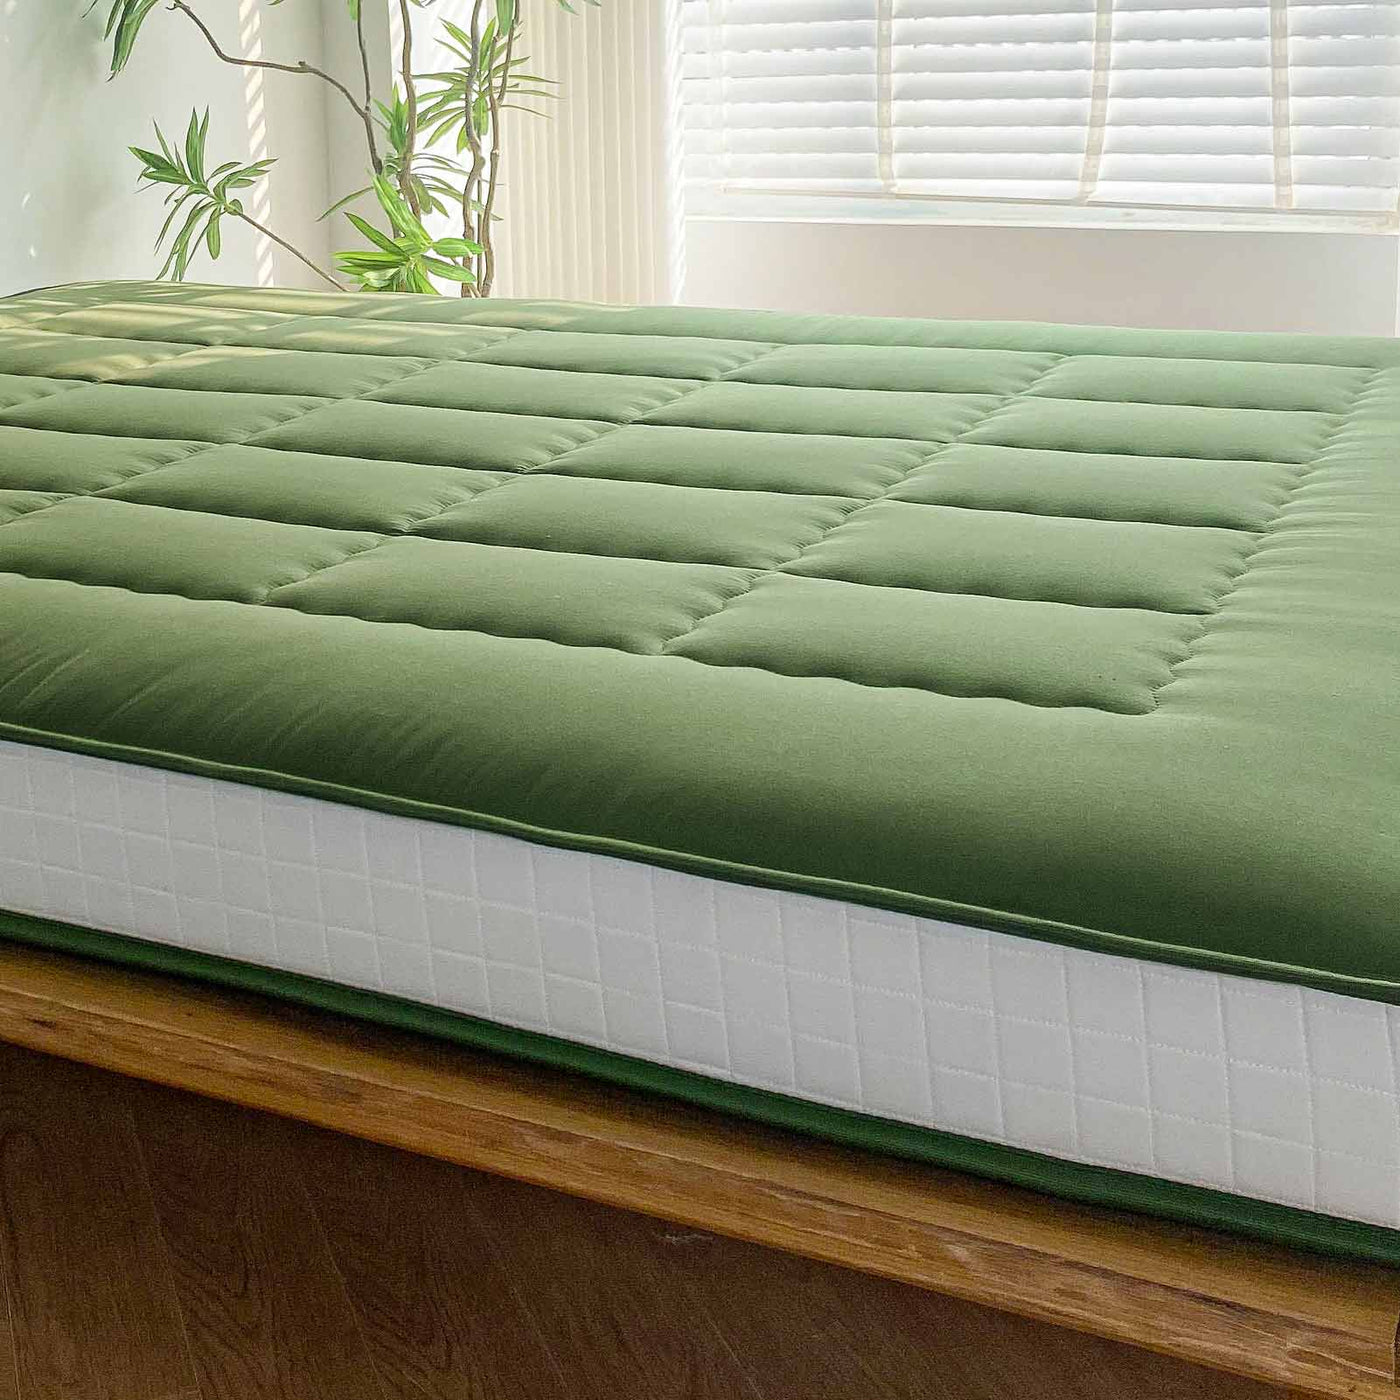 MAXYOYO 6" Extra Thick Japanese Futon Mattress with Rectangle Quilted, Stylish Floor Bed For Family, Green